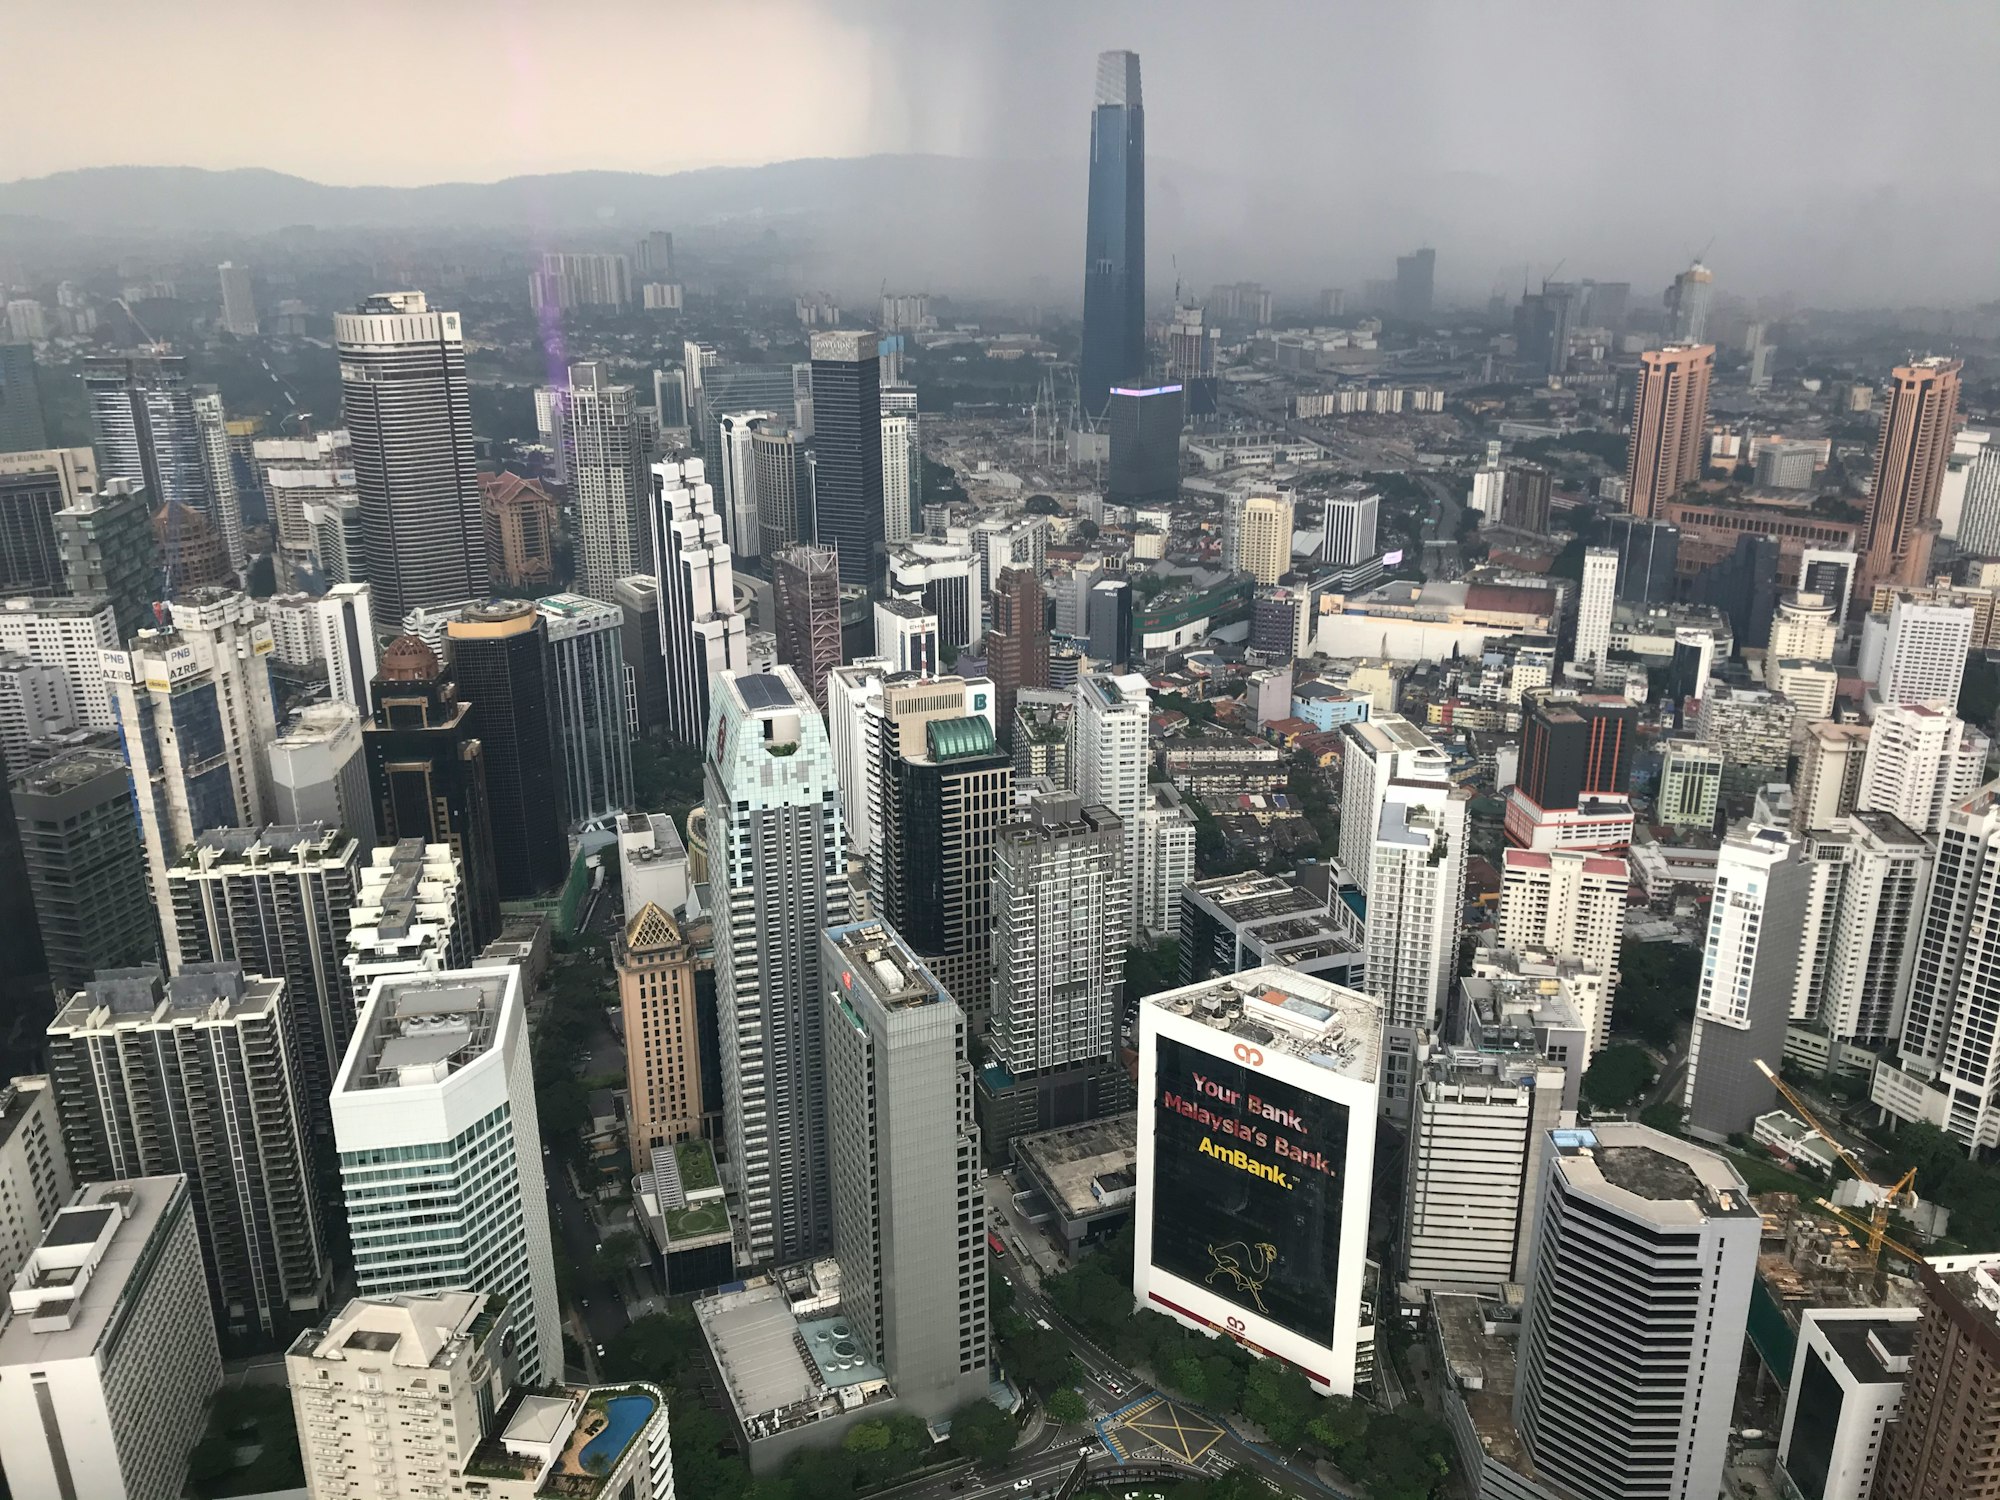 Kuala Lumpur was ranked 10th among cities to have most buildings above 100 metres with a combined height of 34,035 metres from its 244 high rise buildings[1]. As of 2019, the city of Kuala Lumpur has over 1,900[2] completed high-rises building, of which over 700 are buildings standing taller than 100 m (328 ft); 170 buildings over 150 m (492 ft), 42 buildings over 200 m (656 ft) and 5 buildings over 300 m (984 ft), the majority of it being located in the KLCC, Golden Triangle, Mont' Kiara and Old Downtown[3]. The tallest building in Kuala Lumpur is Petronas Twin Towers were the tallestbuilding